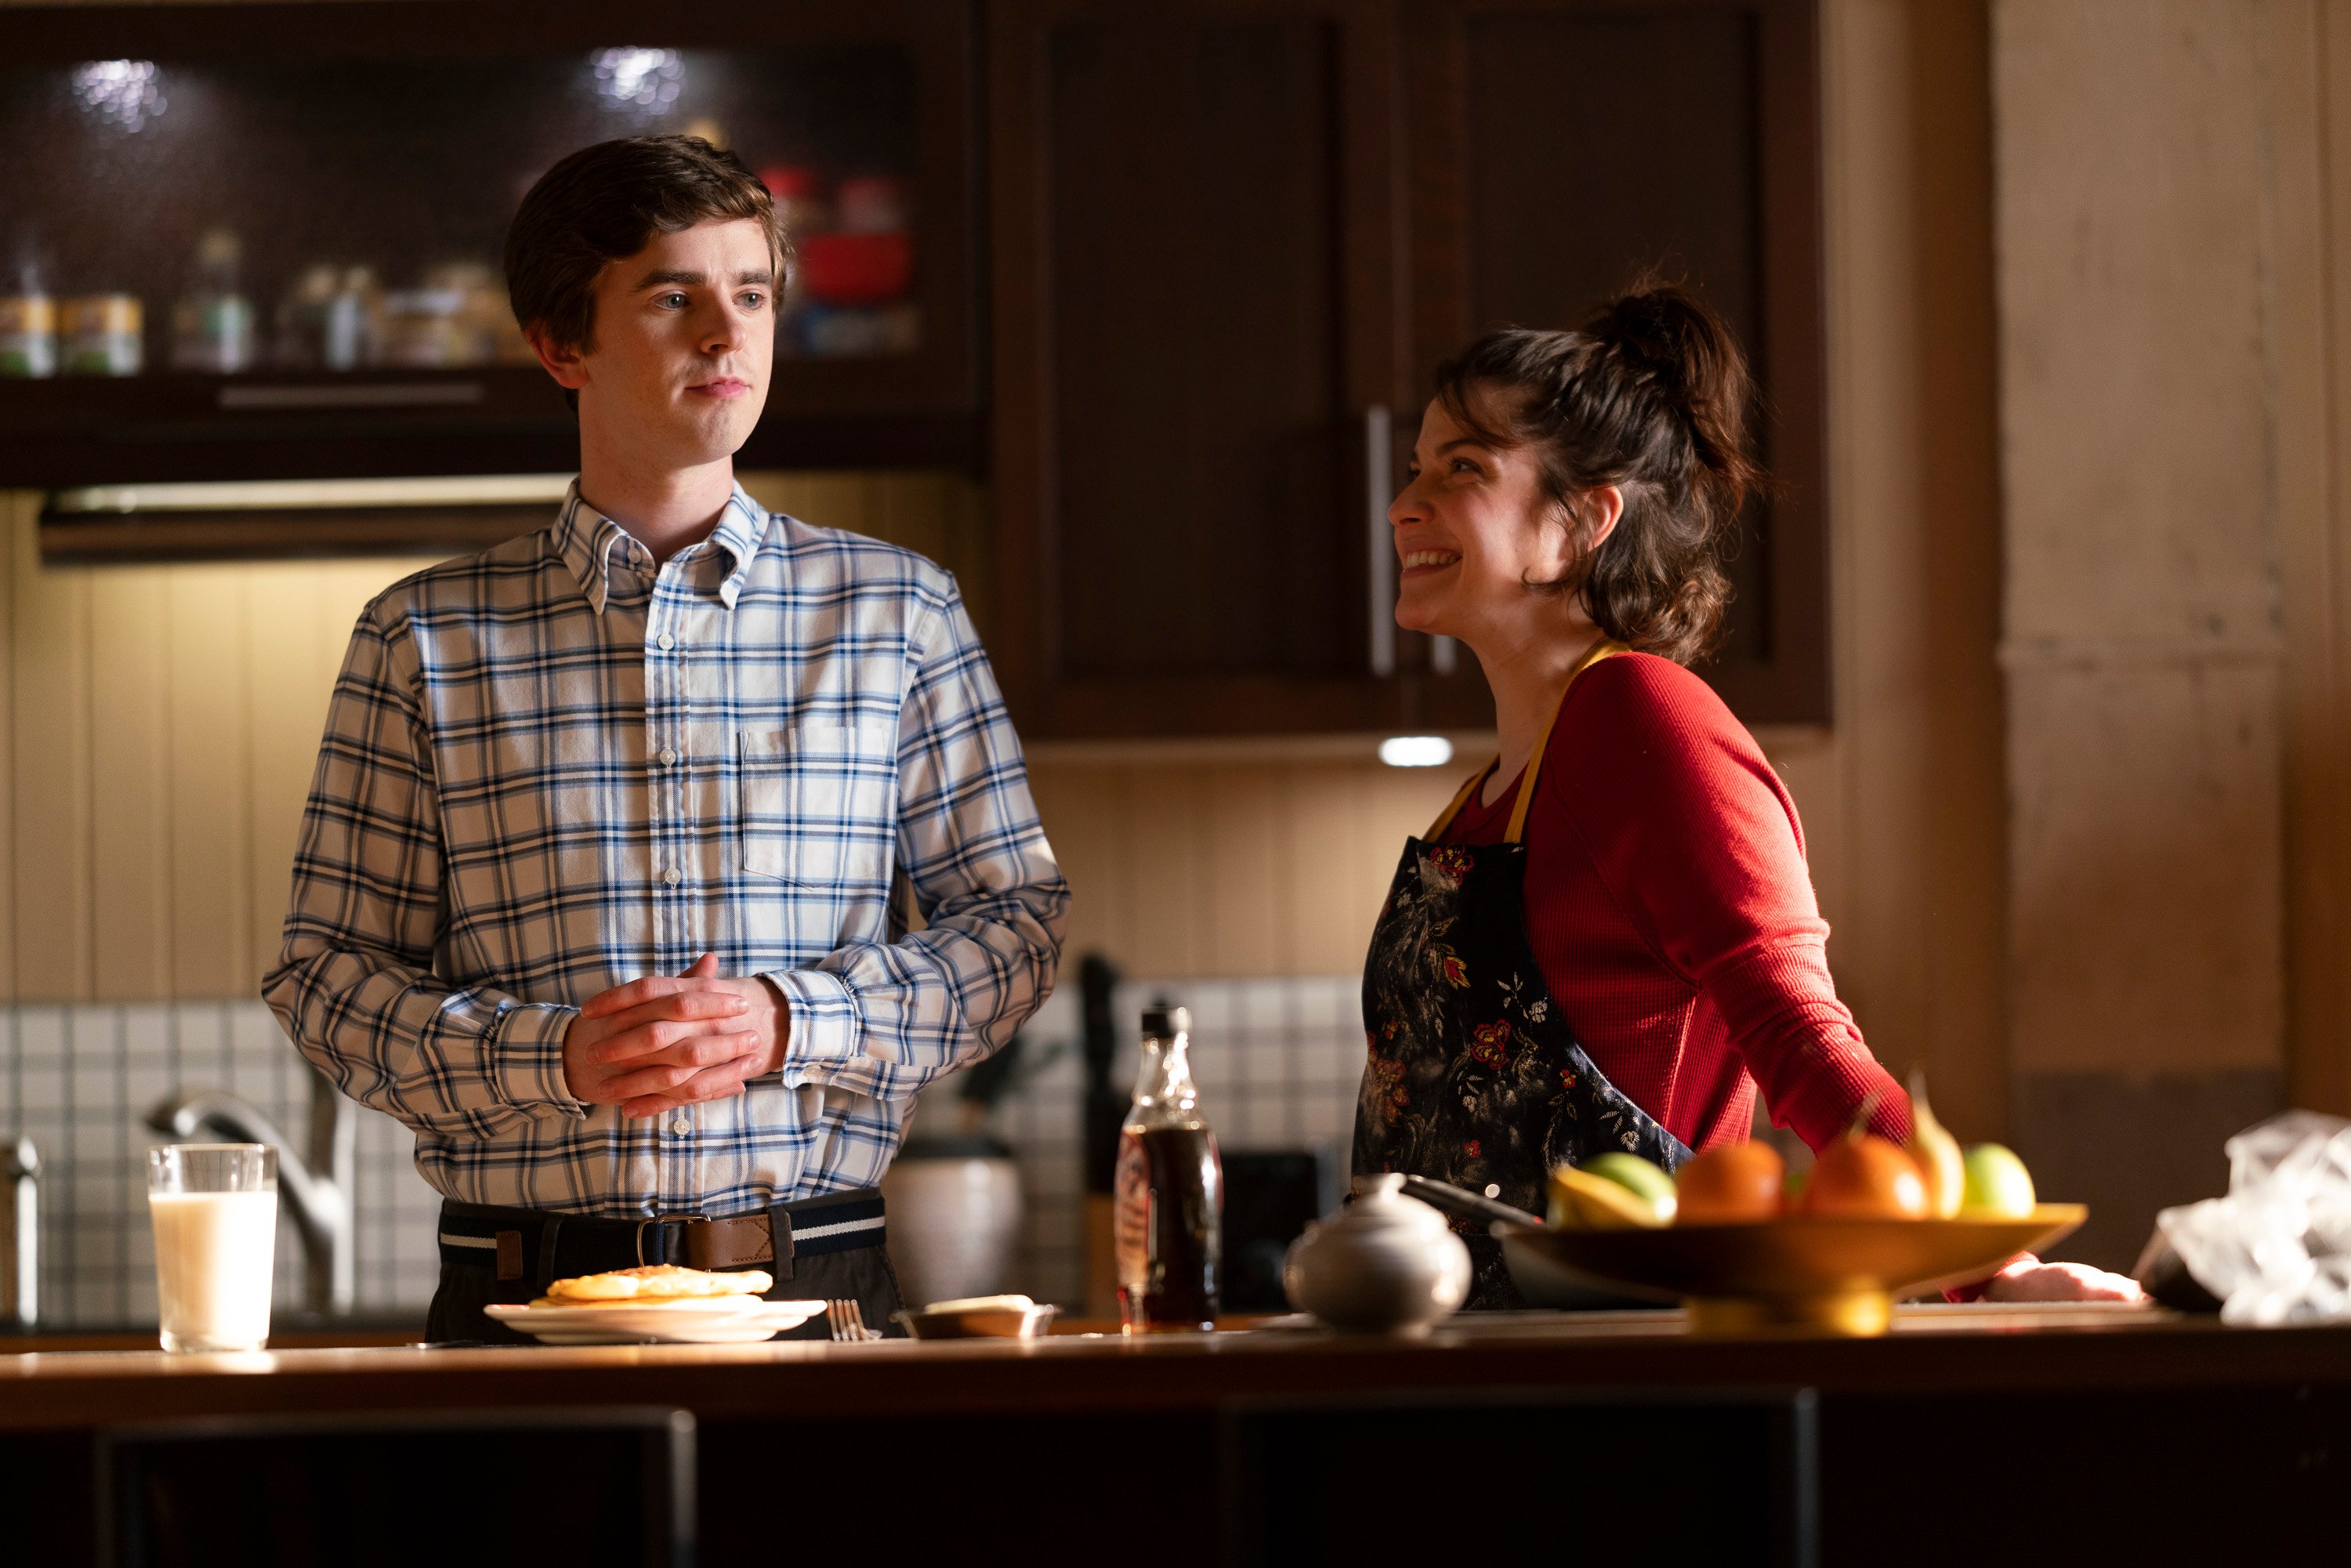 Freddie Highmore and Paige Spara on 'The Good Doctor' | David Bukach via Getty Images